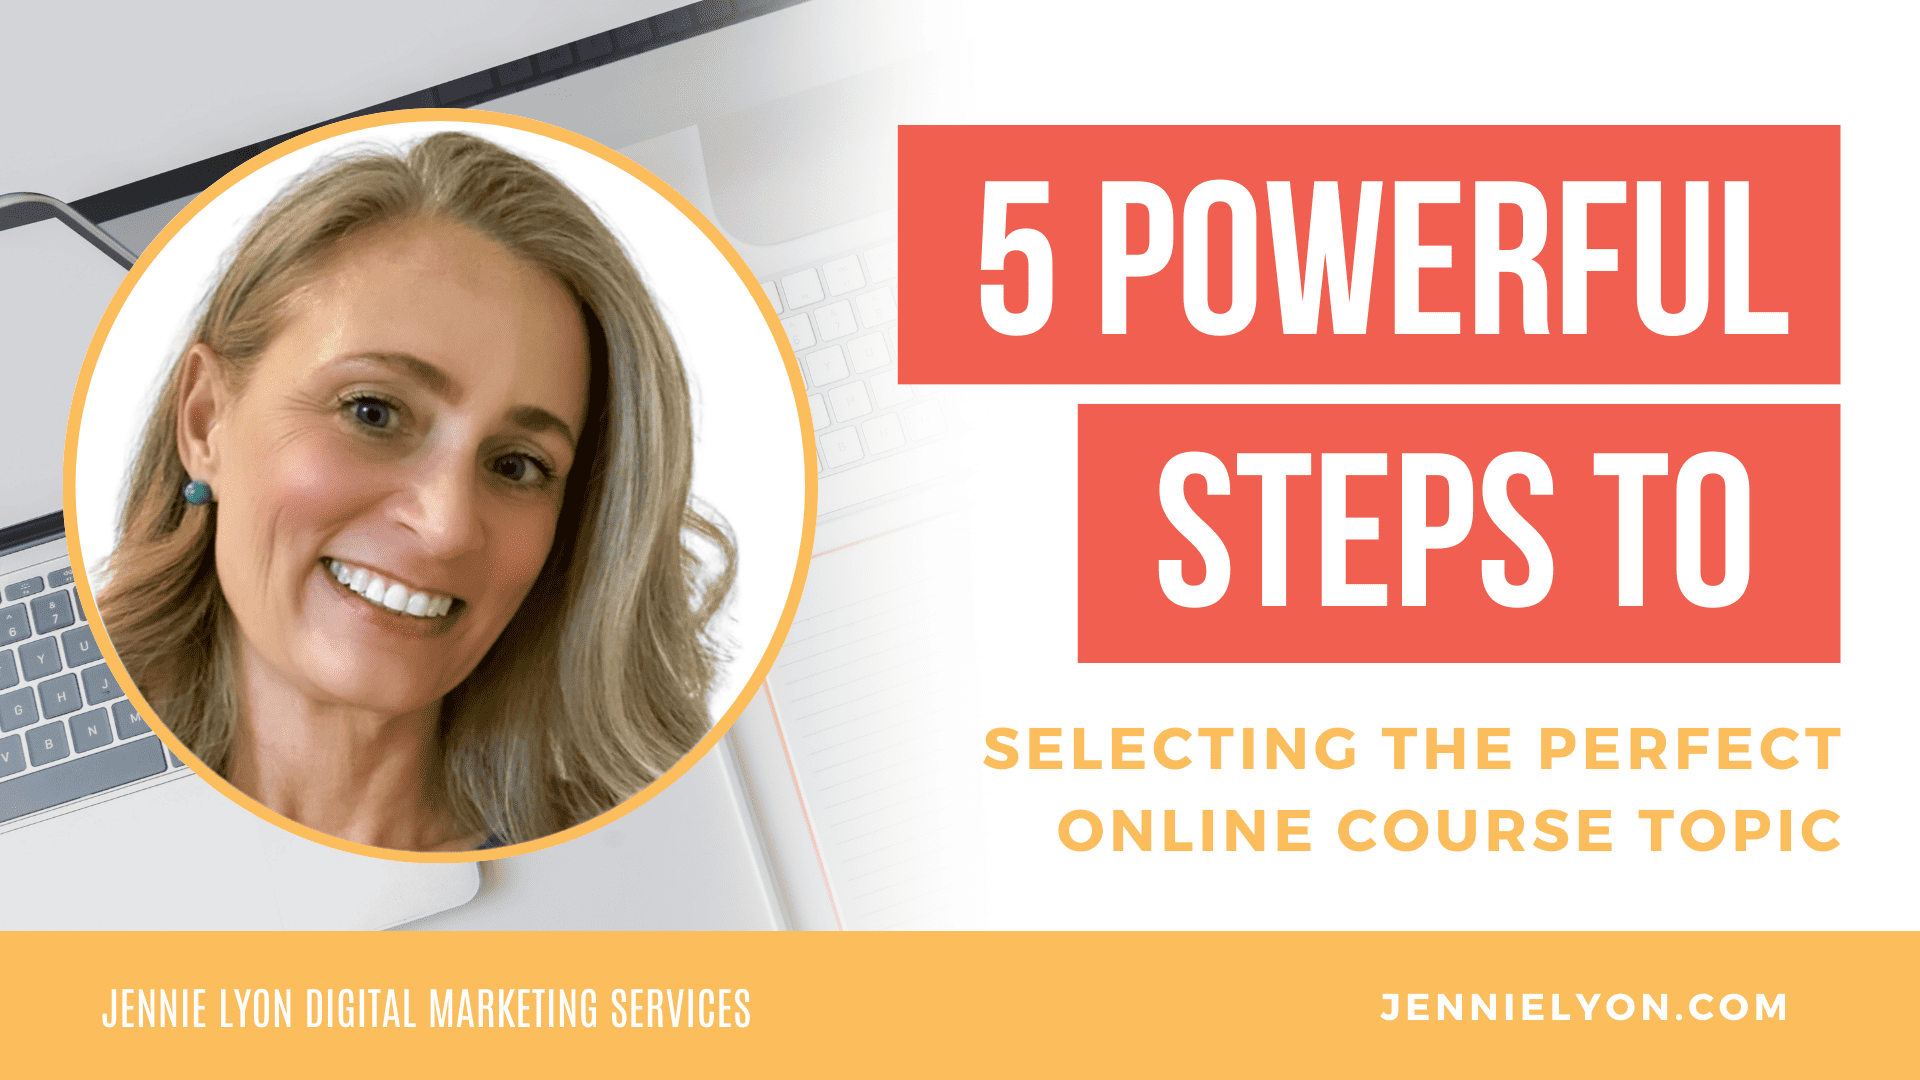 5 Powerful Steps To Selecting The Perfect Online Course Topic